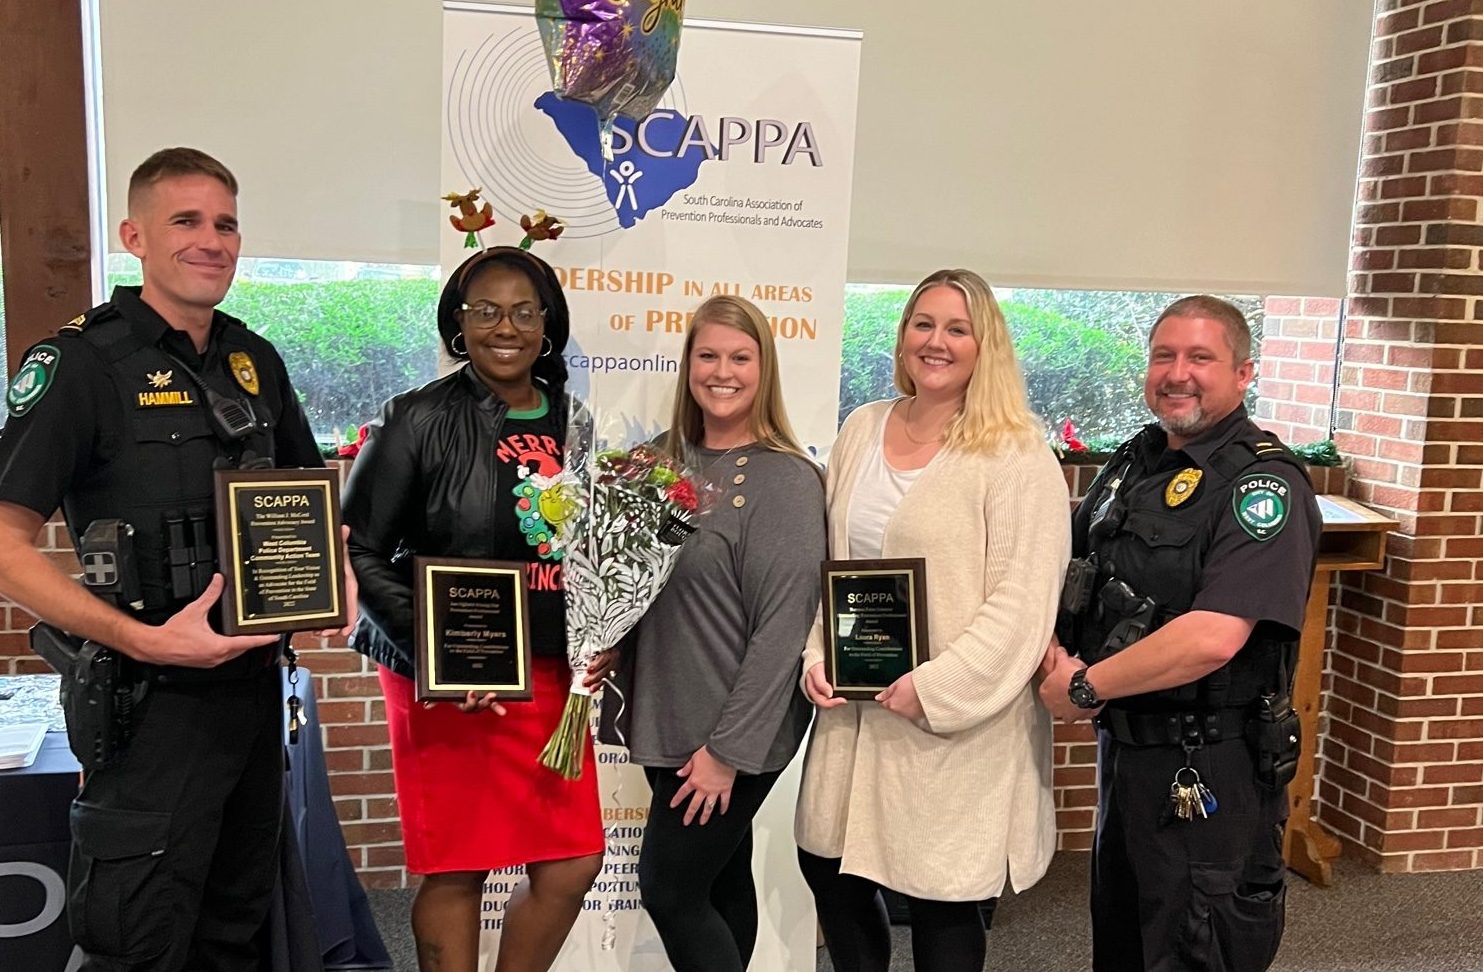 LRADAC’s Prevention Team Recognized at the South Carolina Association of Prevention Professionals and Advocates Statewide Awards Ceremony